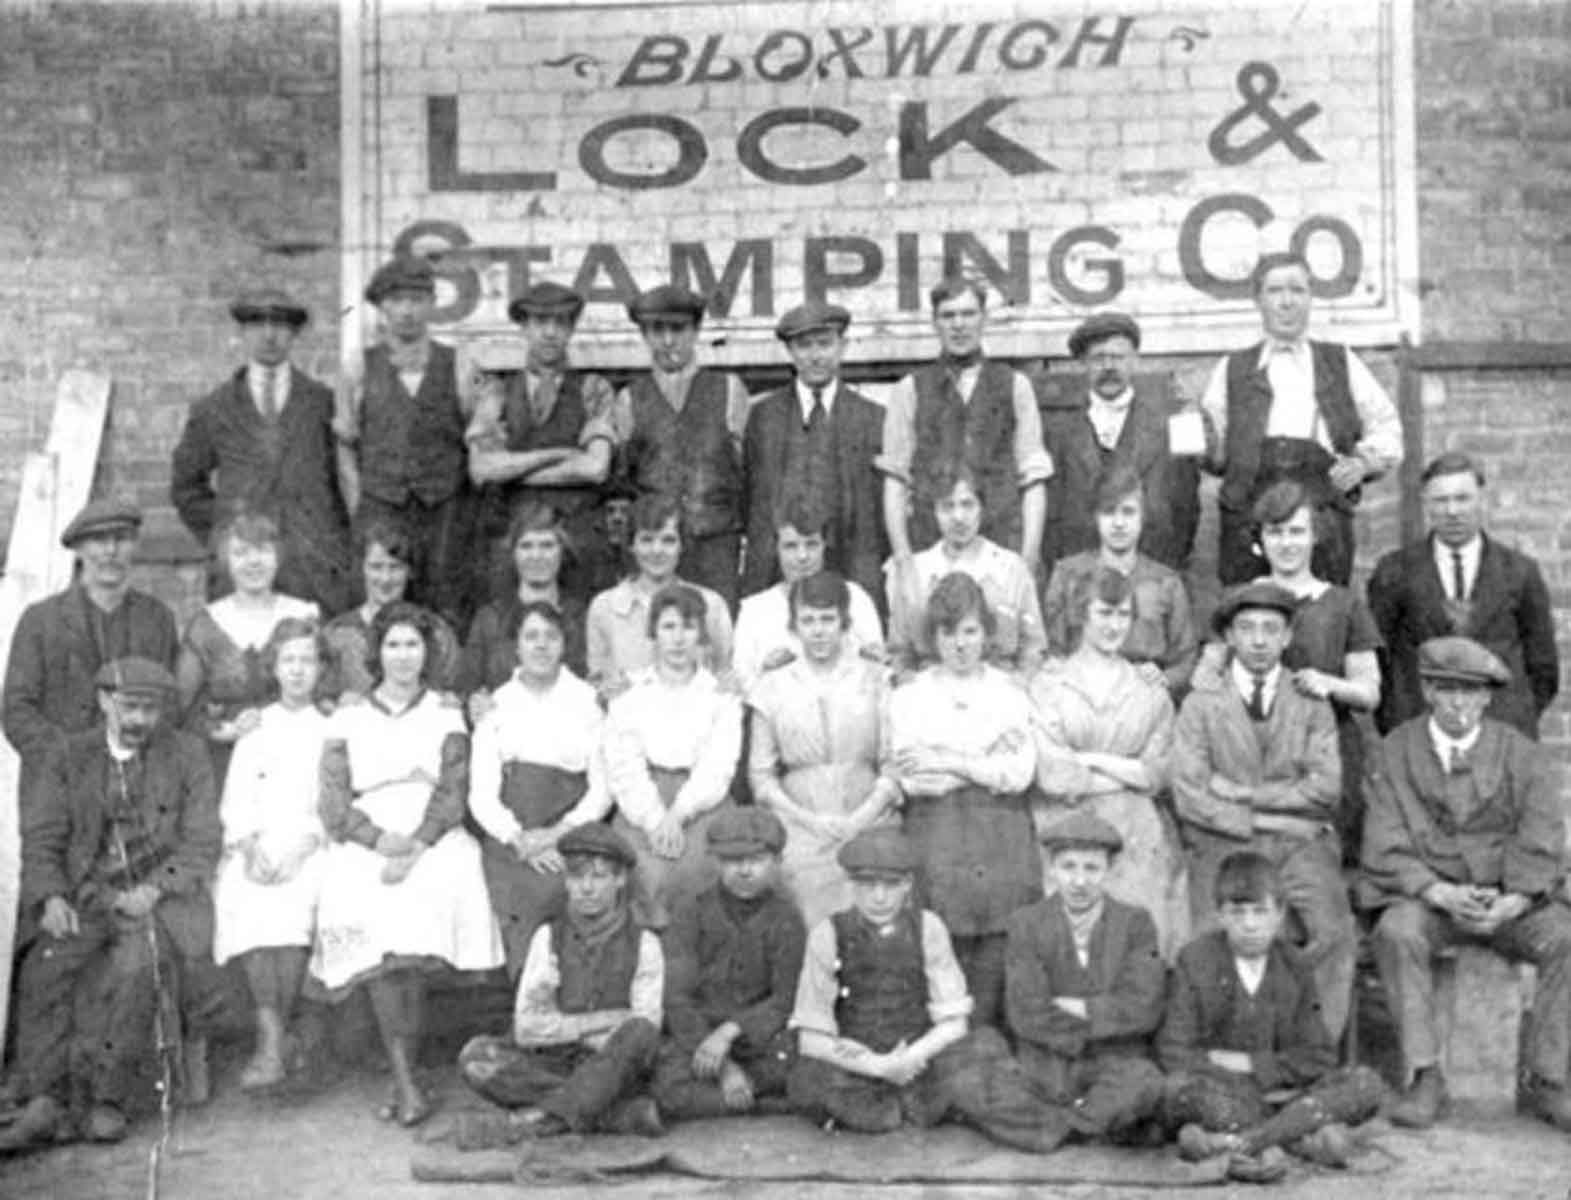 Photo of the Bloxwich Lock & Stamping Co Ltd established in 1915 staff around that time.